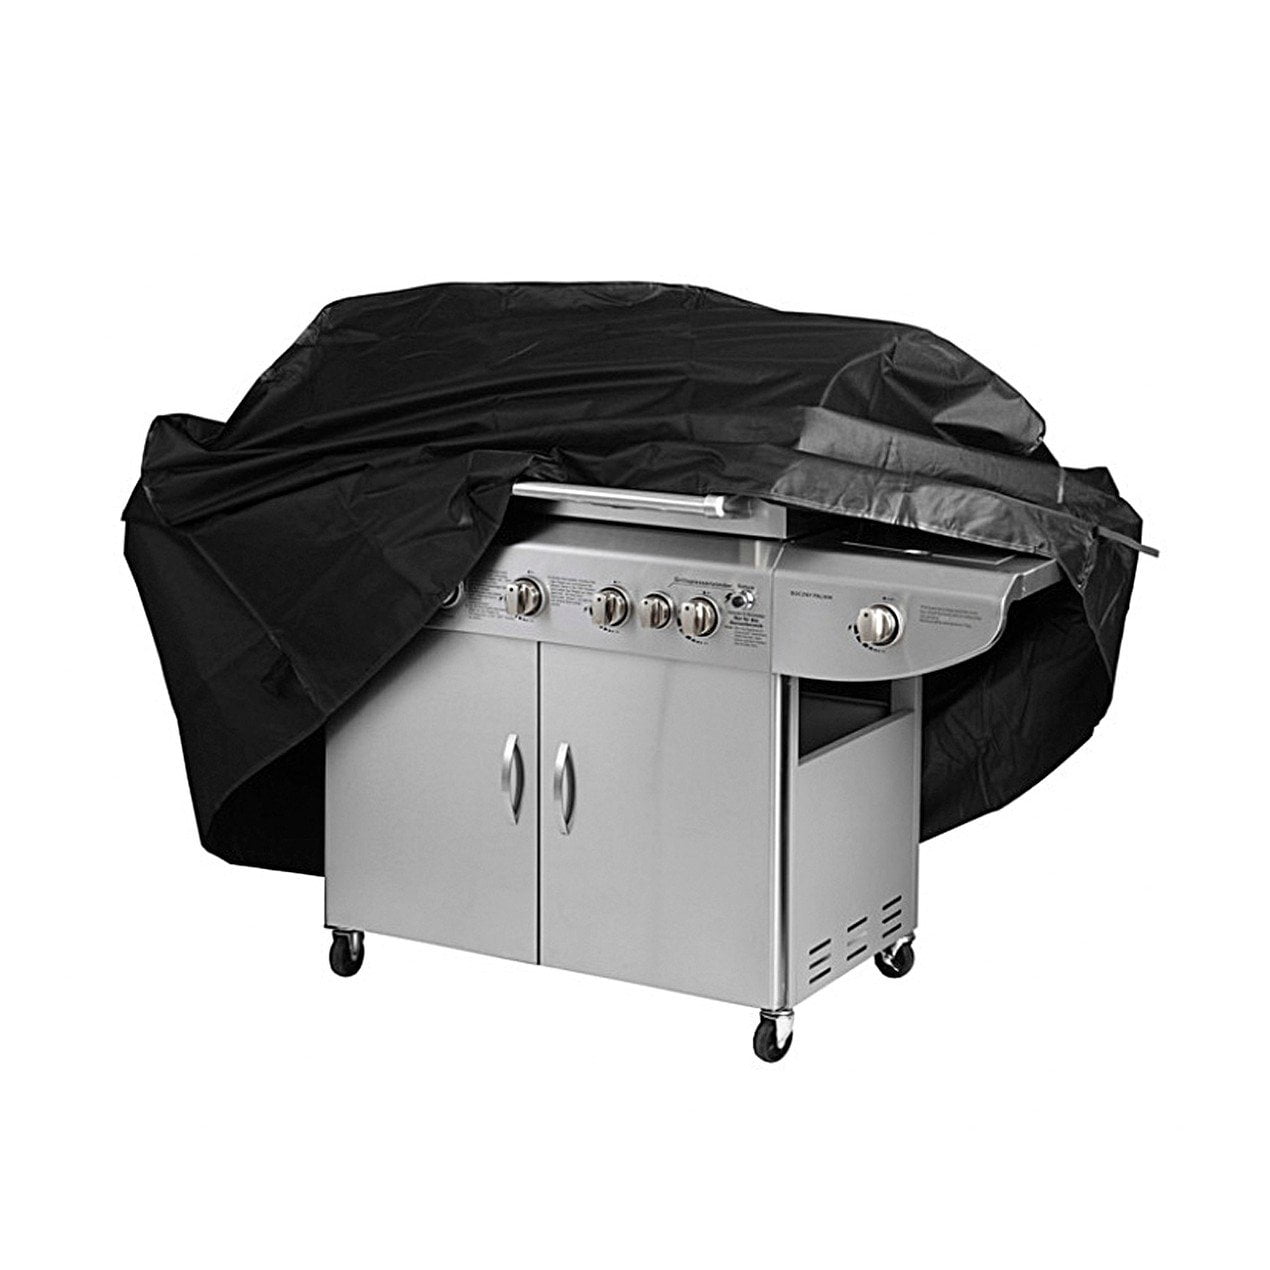 New BBQ Grill Cover Gas Barbecue Outdoor Waterproof Protection 32/ 58/ 67/75inch 